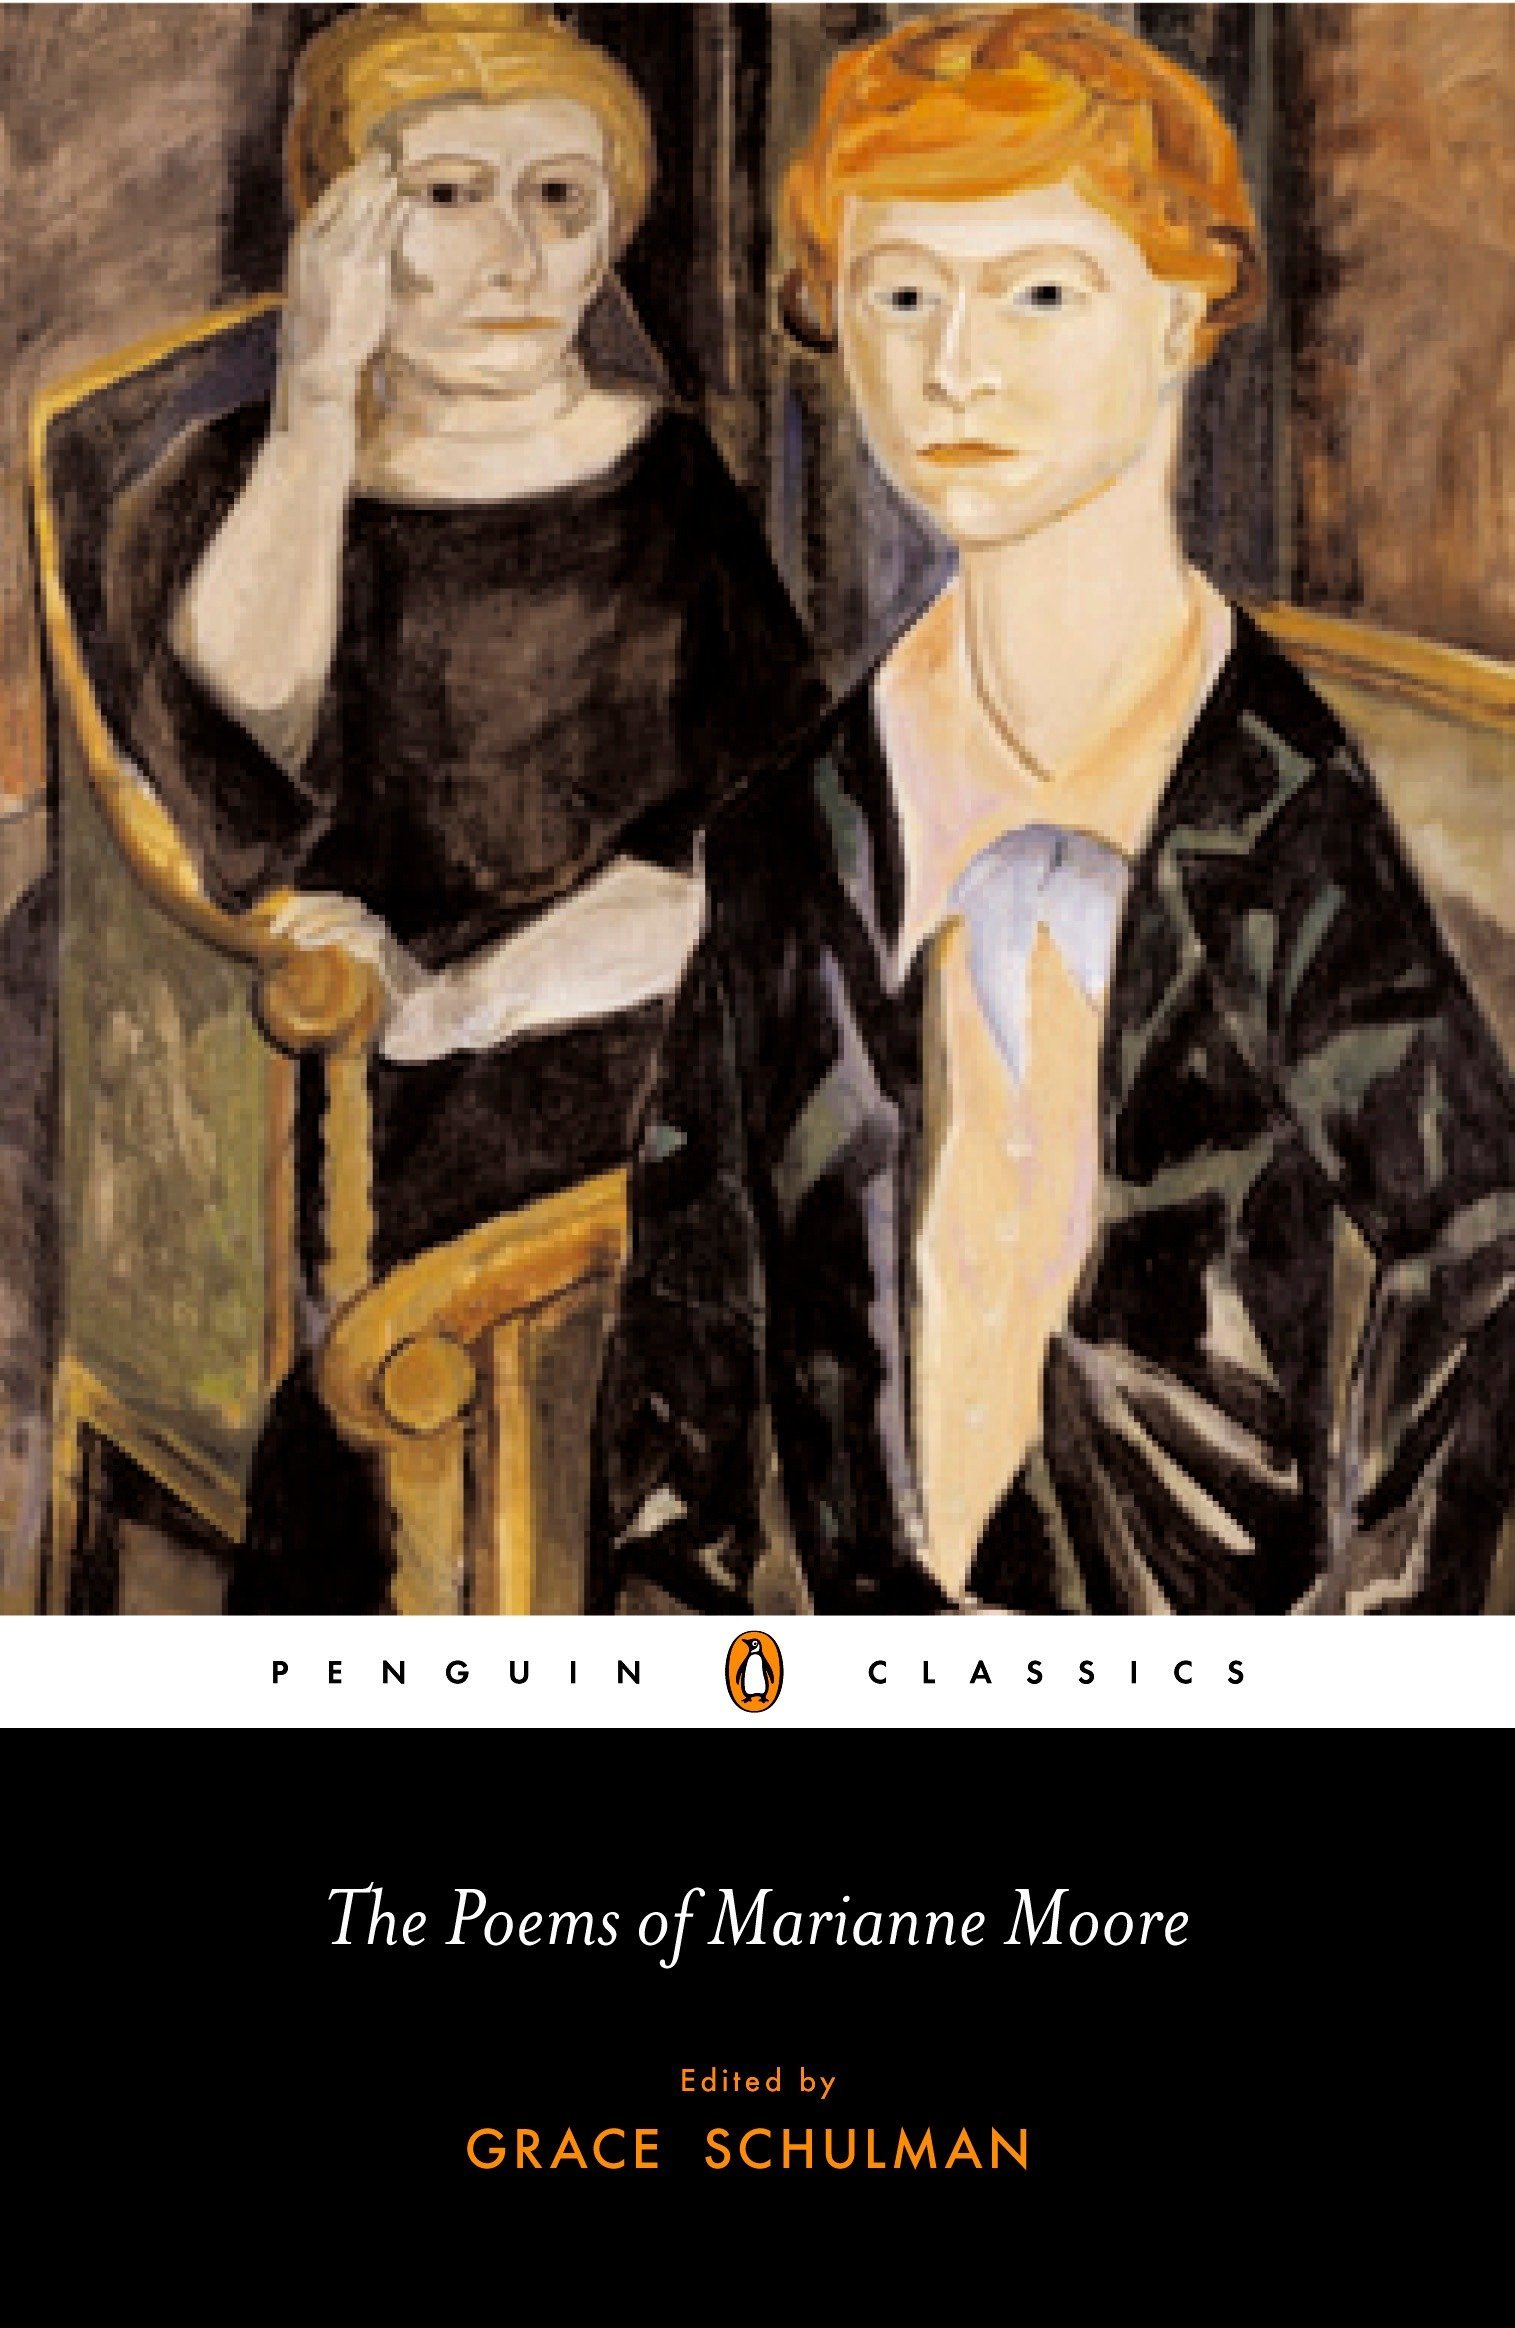 The poems of Marianne Moore (2005, Penguin Classics)